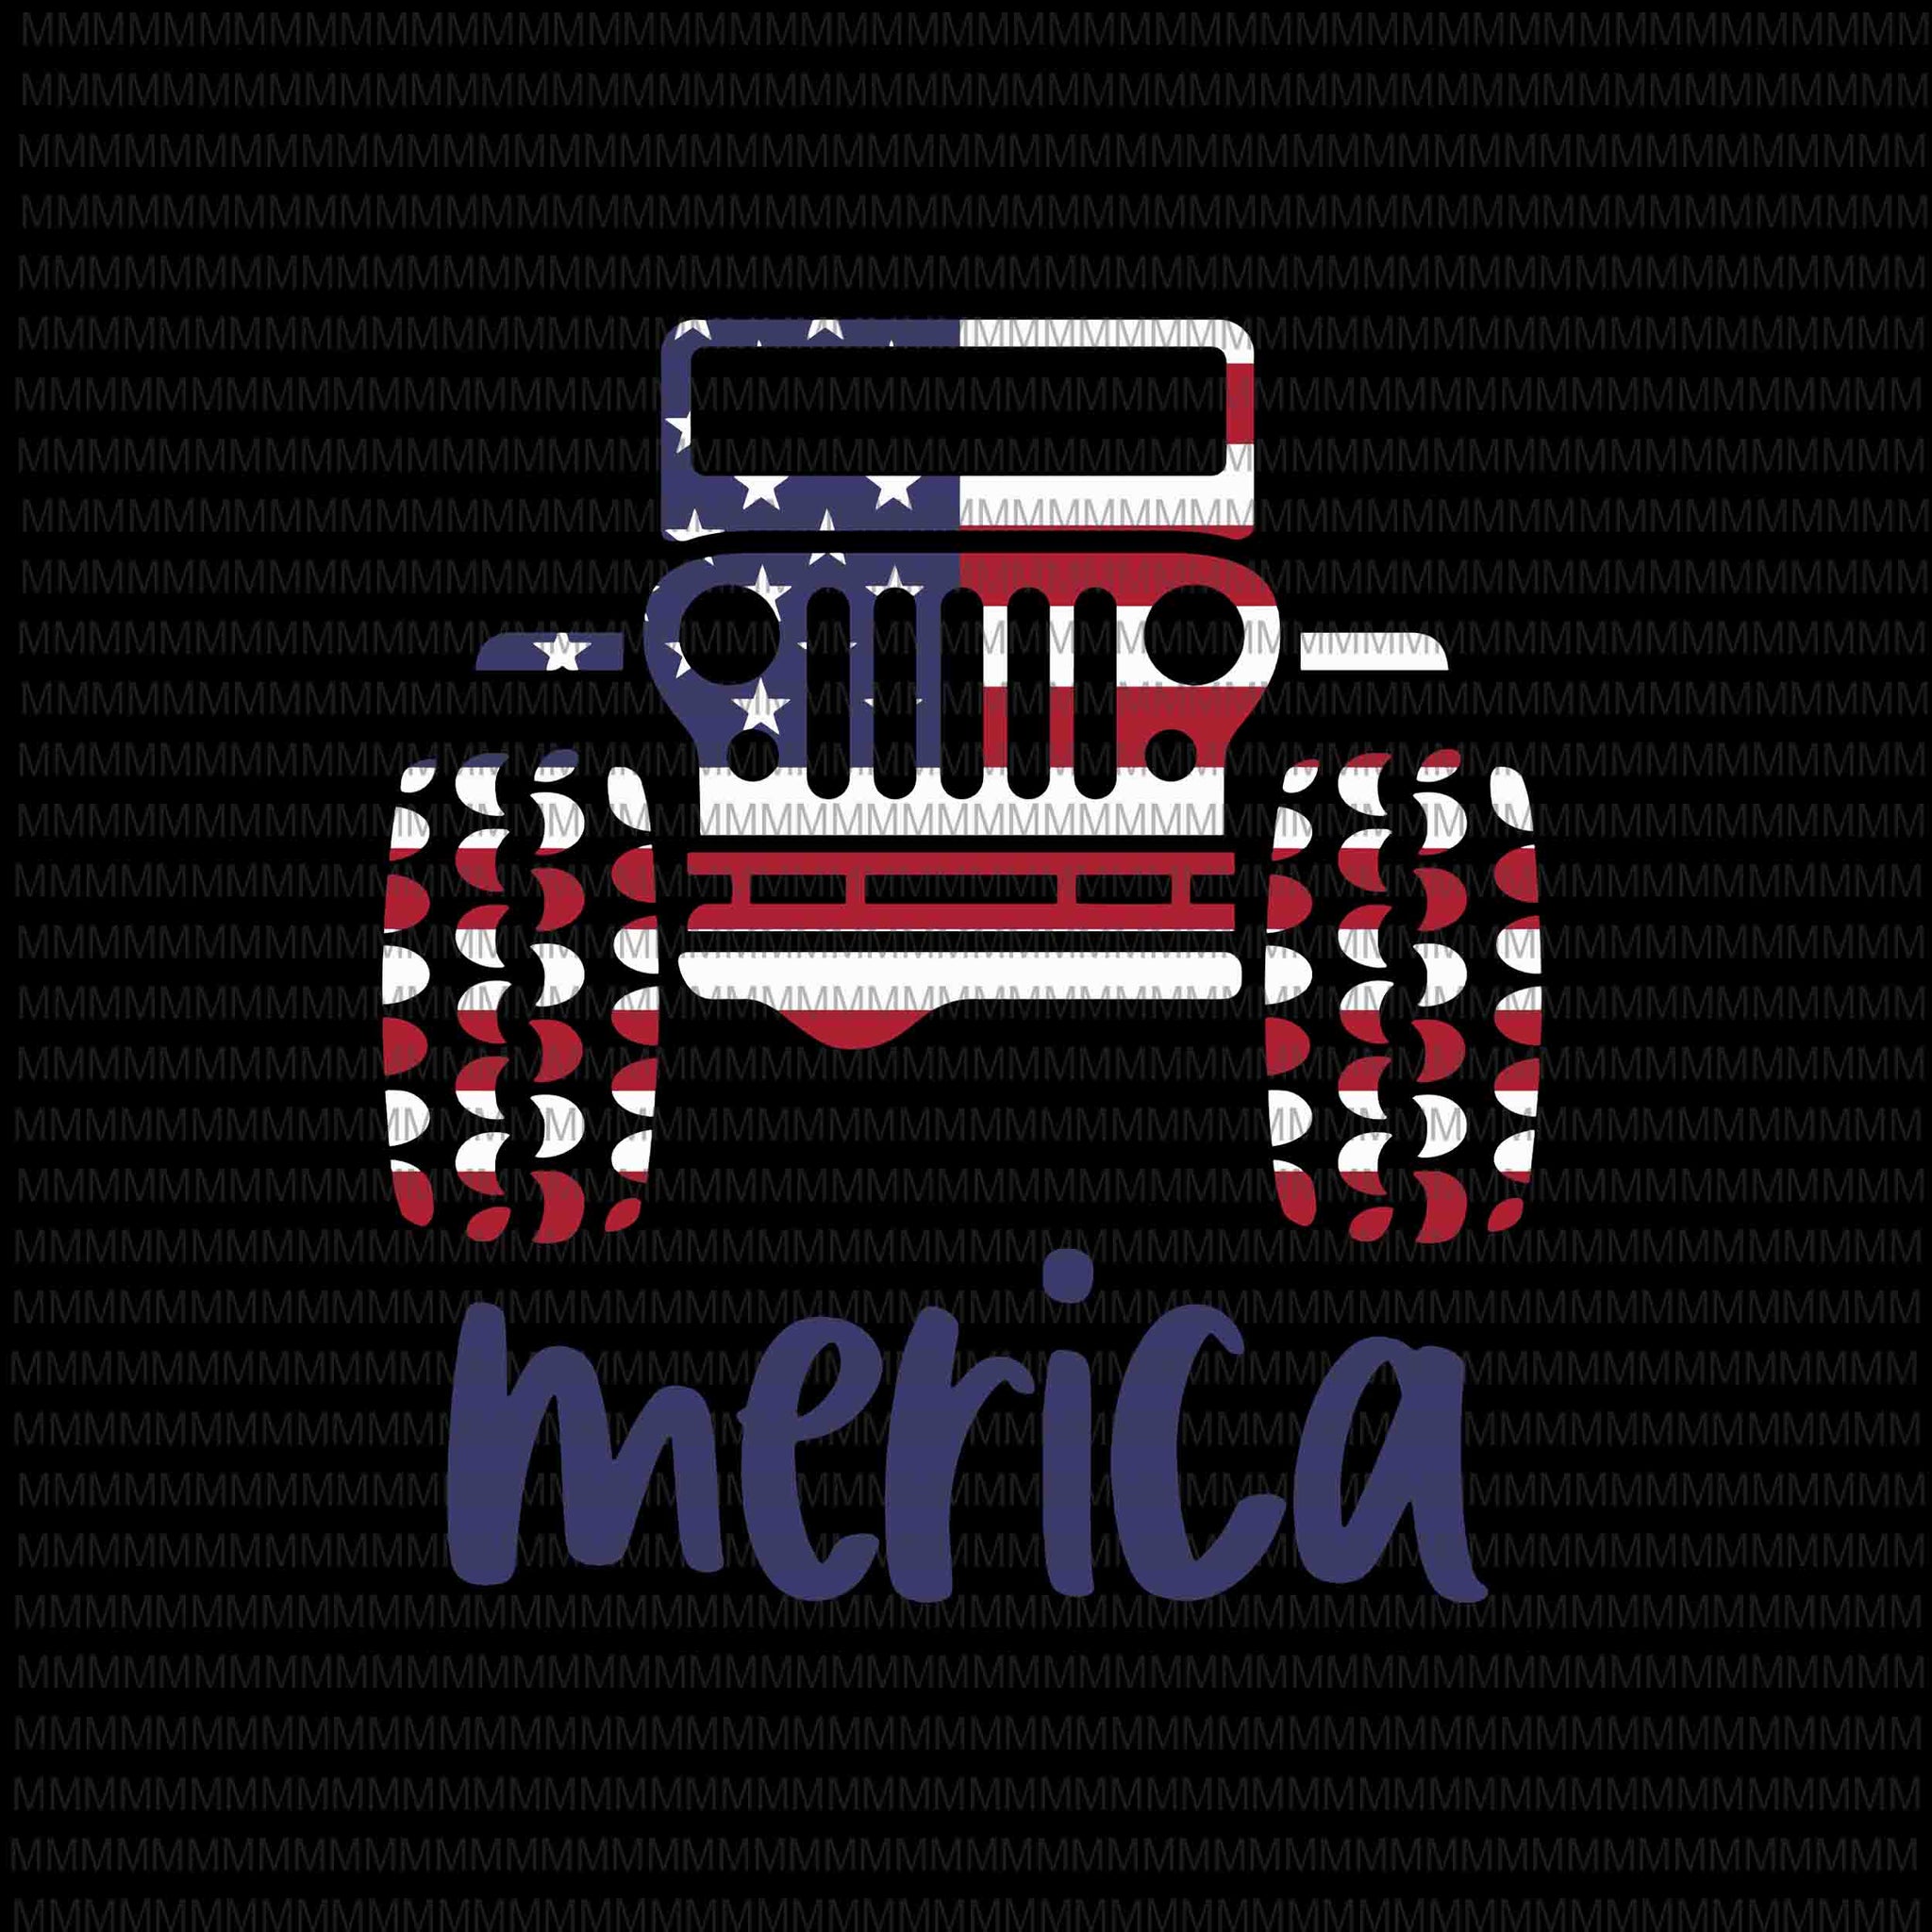 4th of July svg, jeep svg, Fourth of July SVG, merica jeep svg, jeep 4th of July Svg, Patriotic SVG, America Svg, Cricut, Silhouette Cut File, svg dxf eps ready made tshirt design